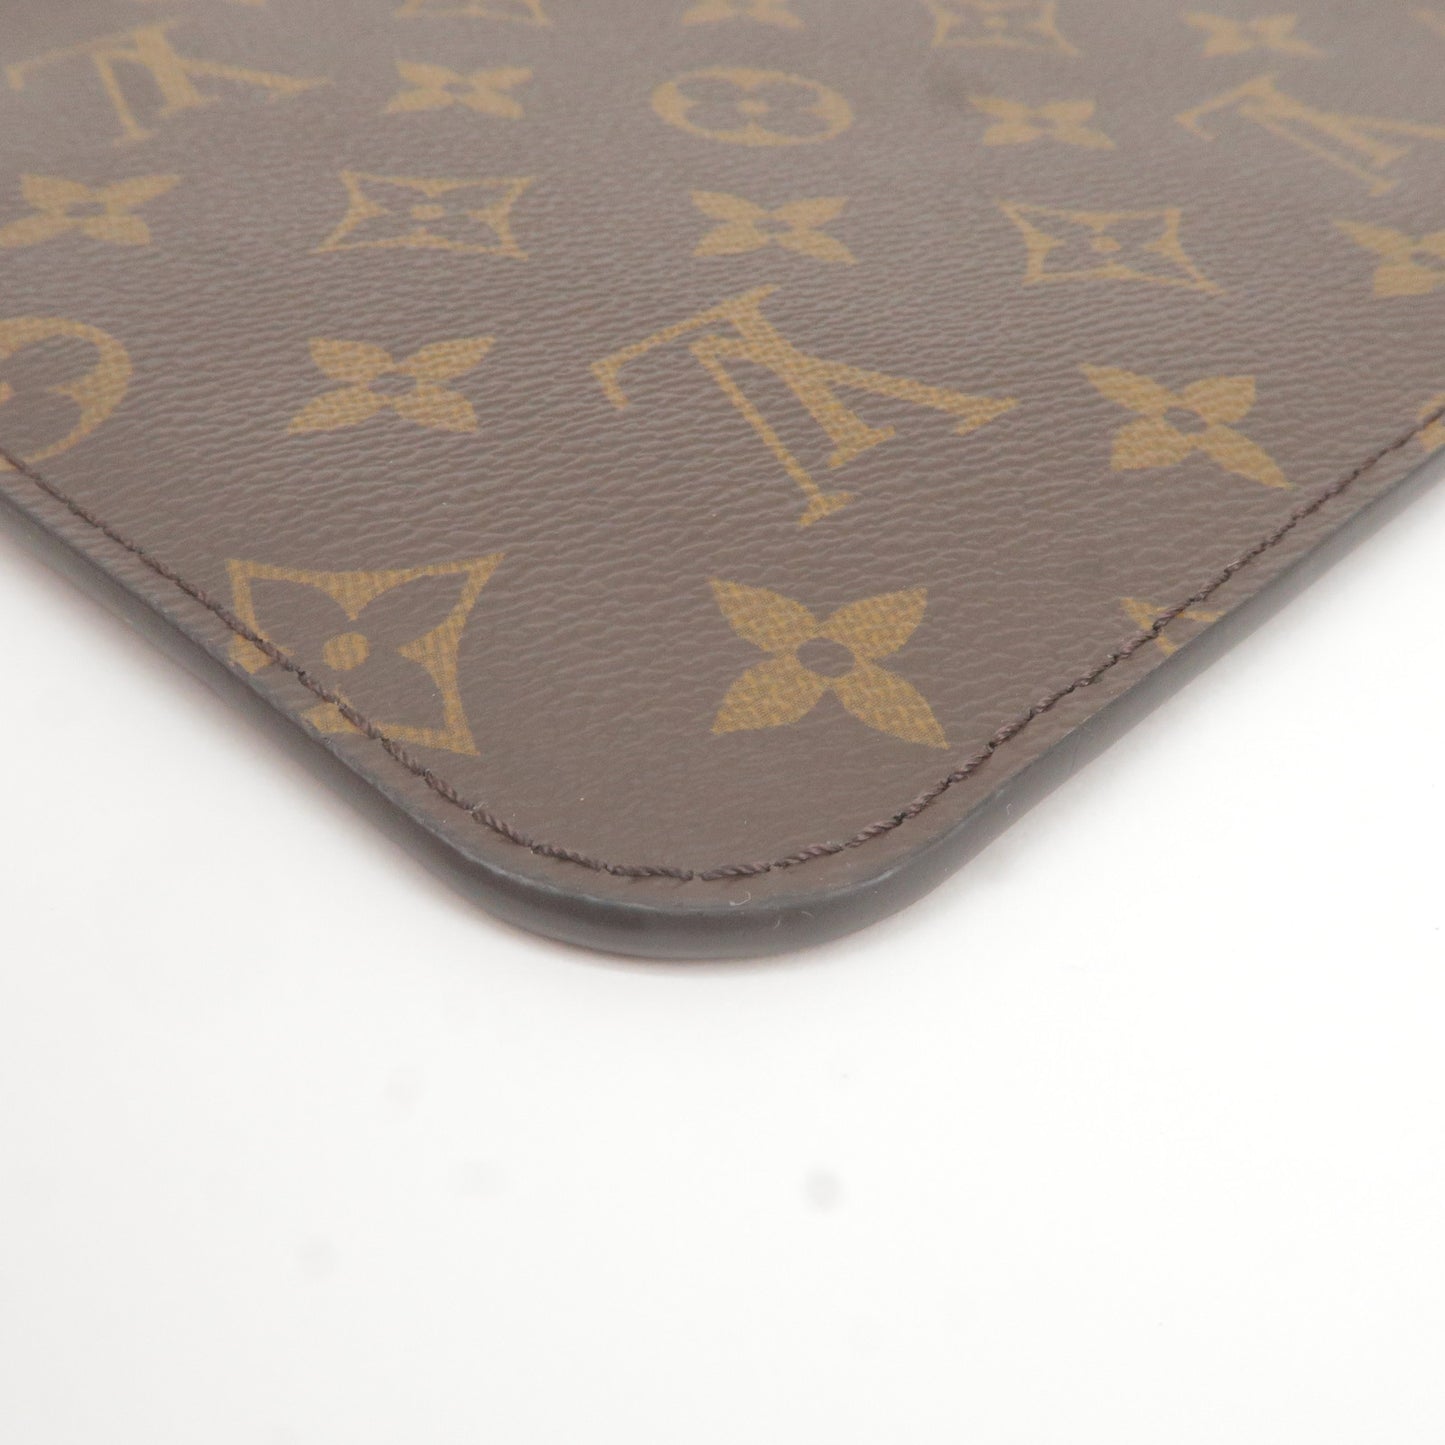 🧚🏻Louis Vuitton Neverfull MM w/ Pouch in Monogram 🧚🏻$1,150 usd